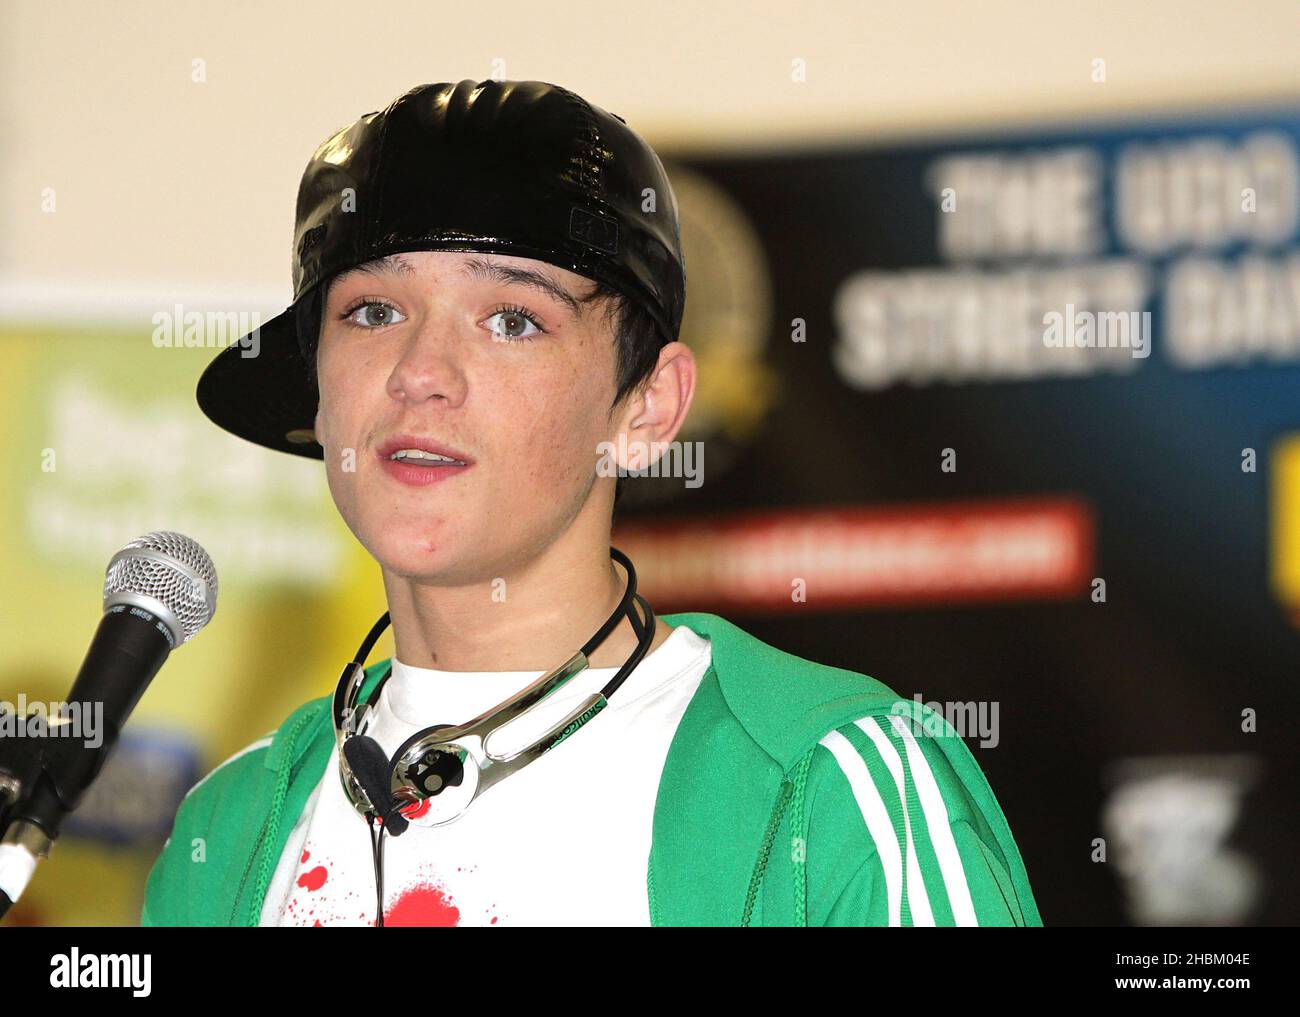 George Sampson at High School Street Dance Championship Annnouncement Partnership with Beat Bullying at Pineapple Studios, Covent Garden, London Stock Photo